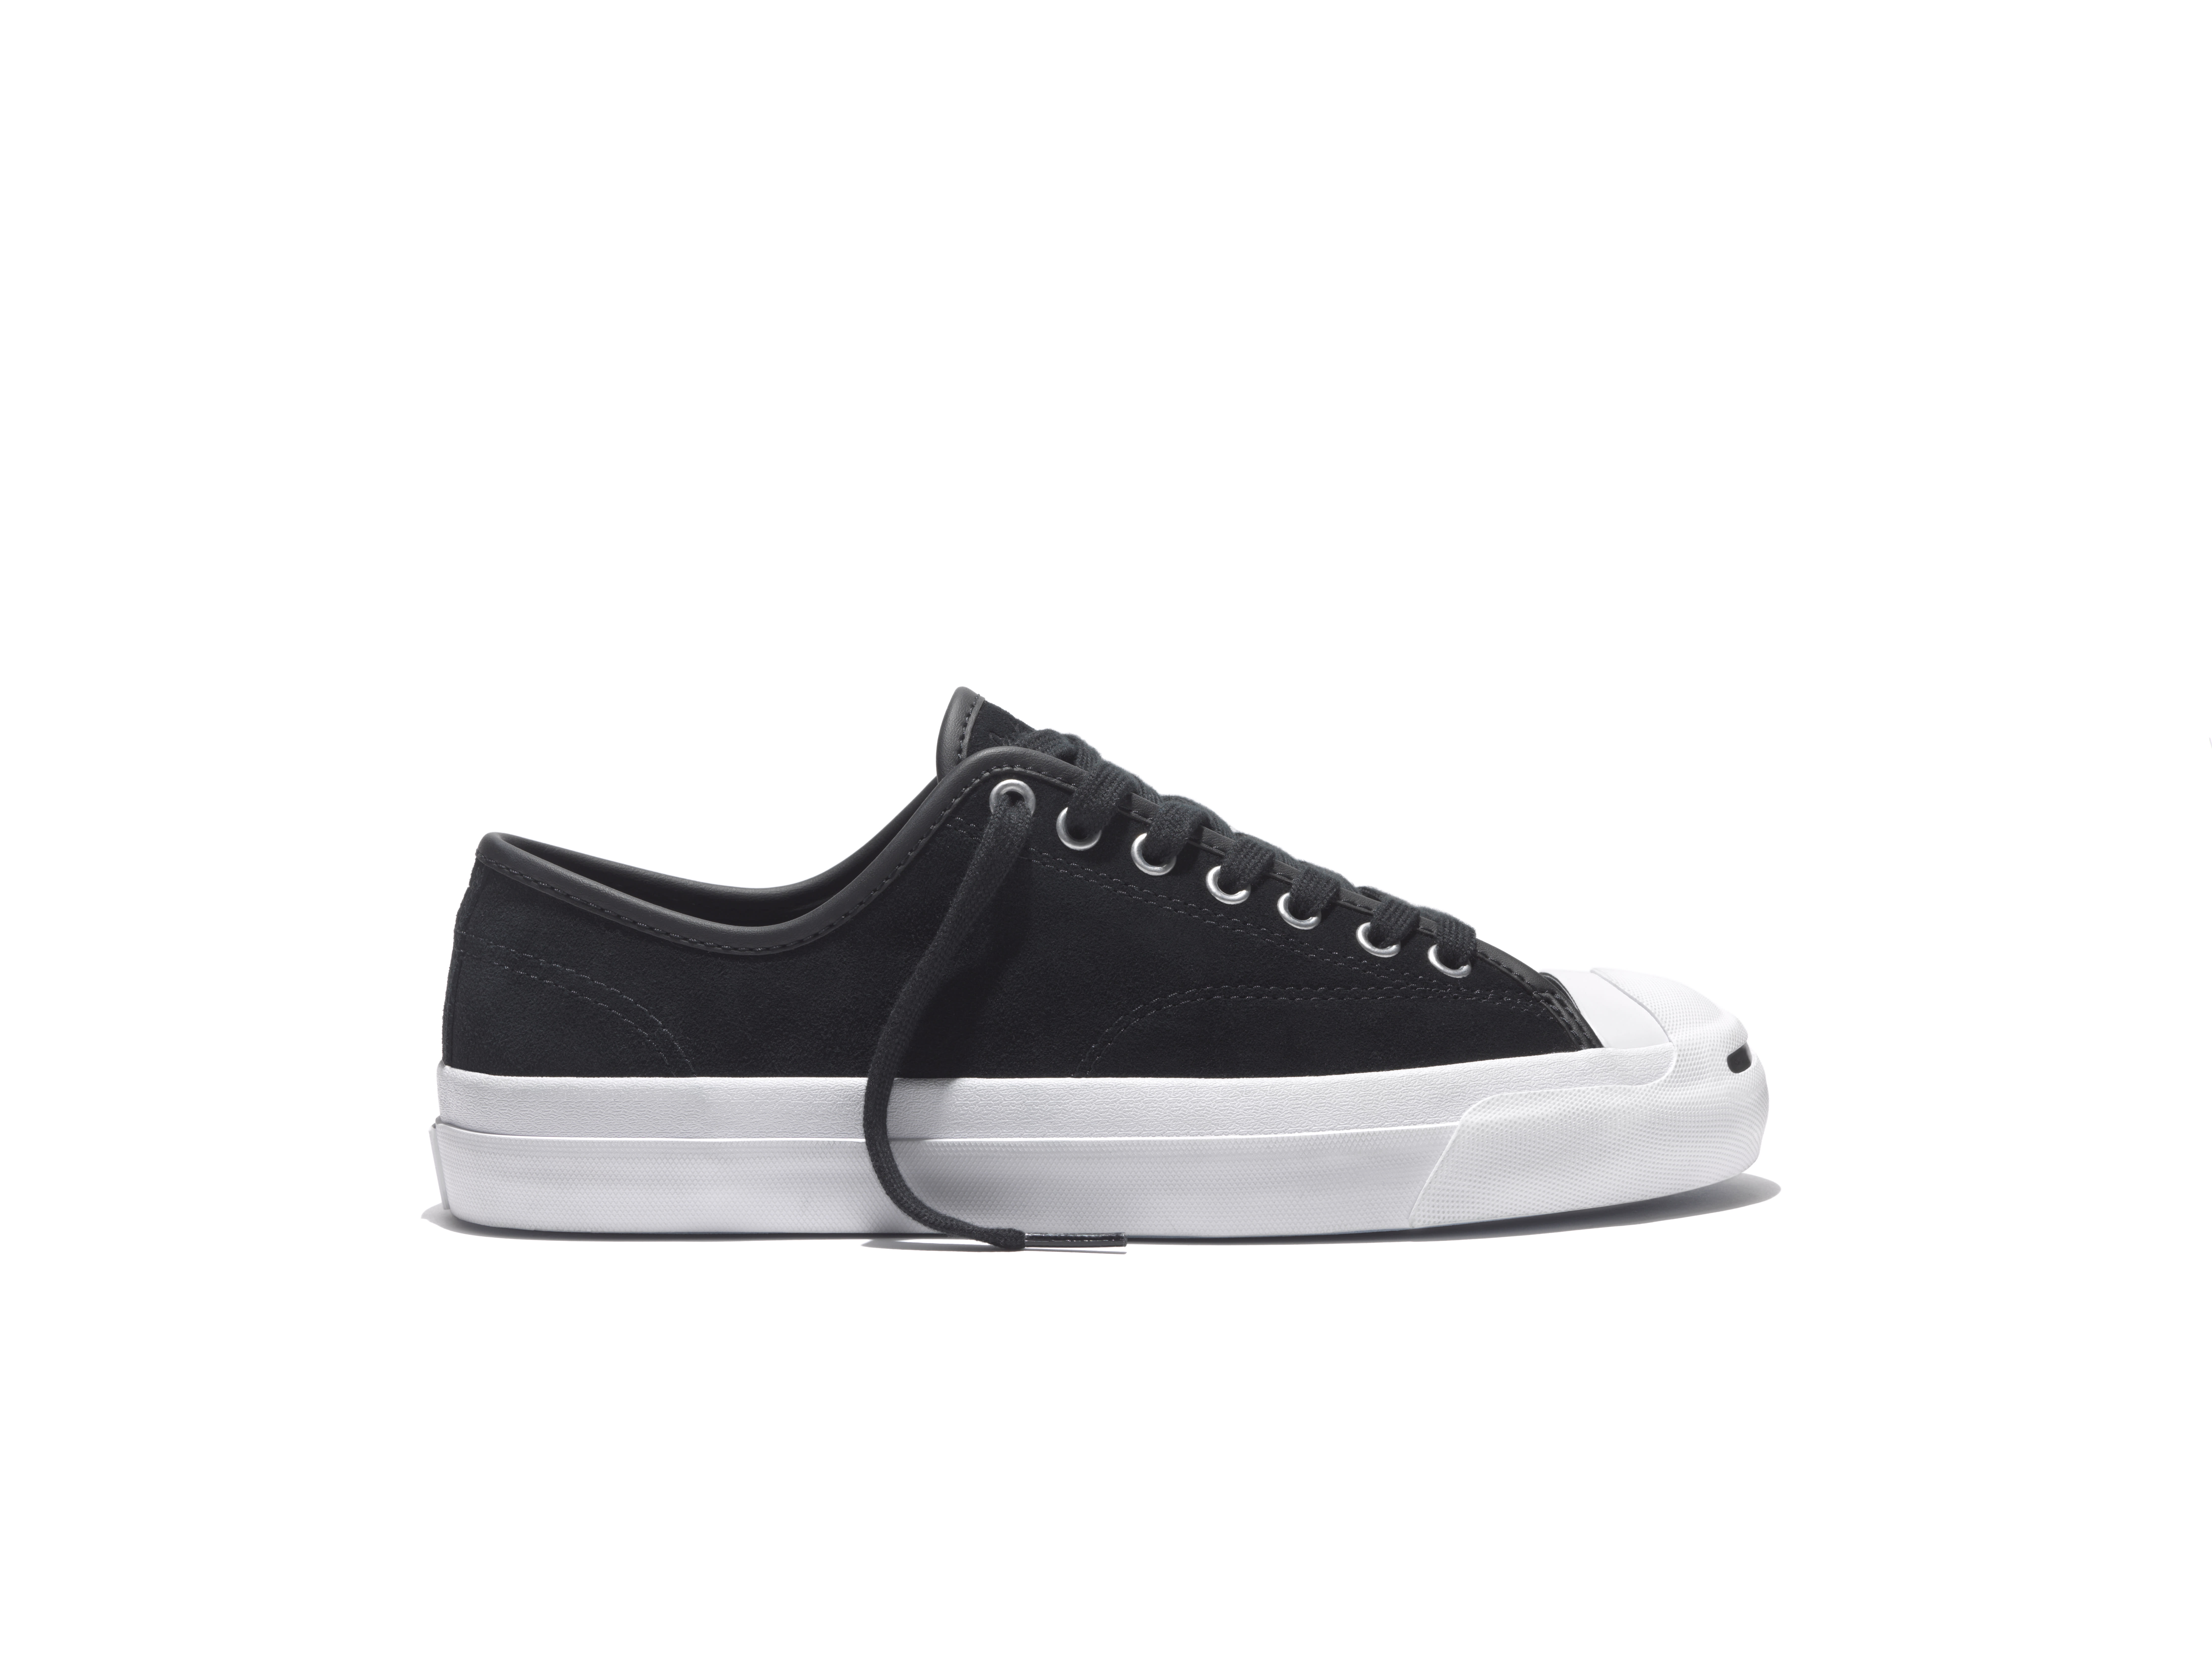 Converse and Polar Skate Co Introduce the Skate Ready Jack Purcell Pro ...